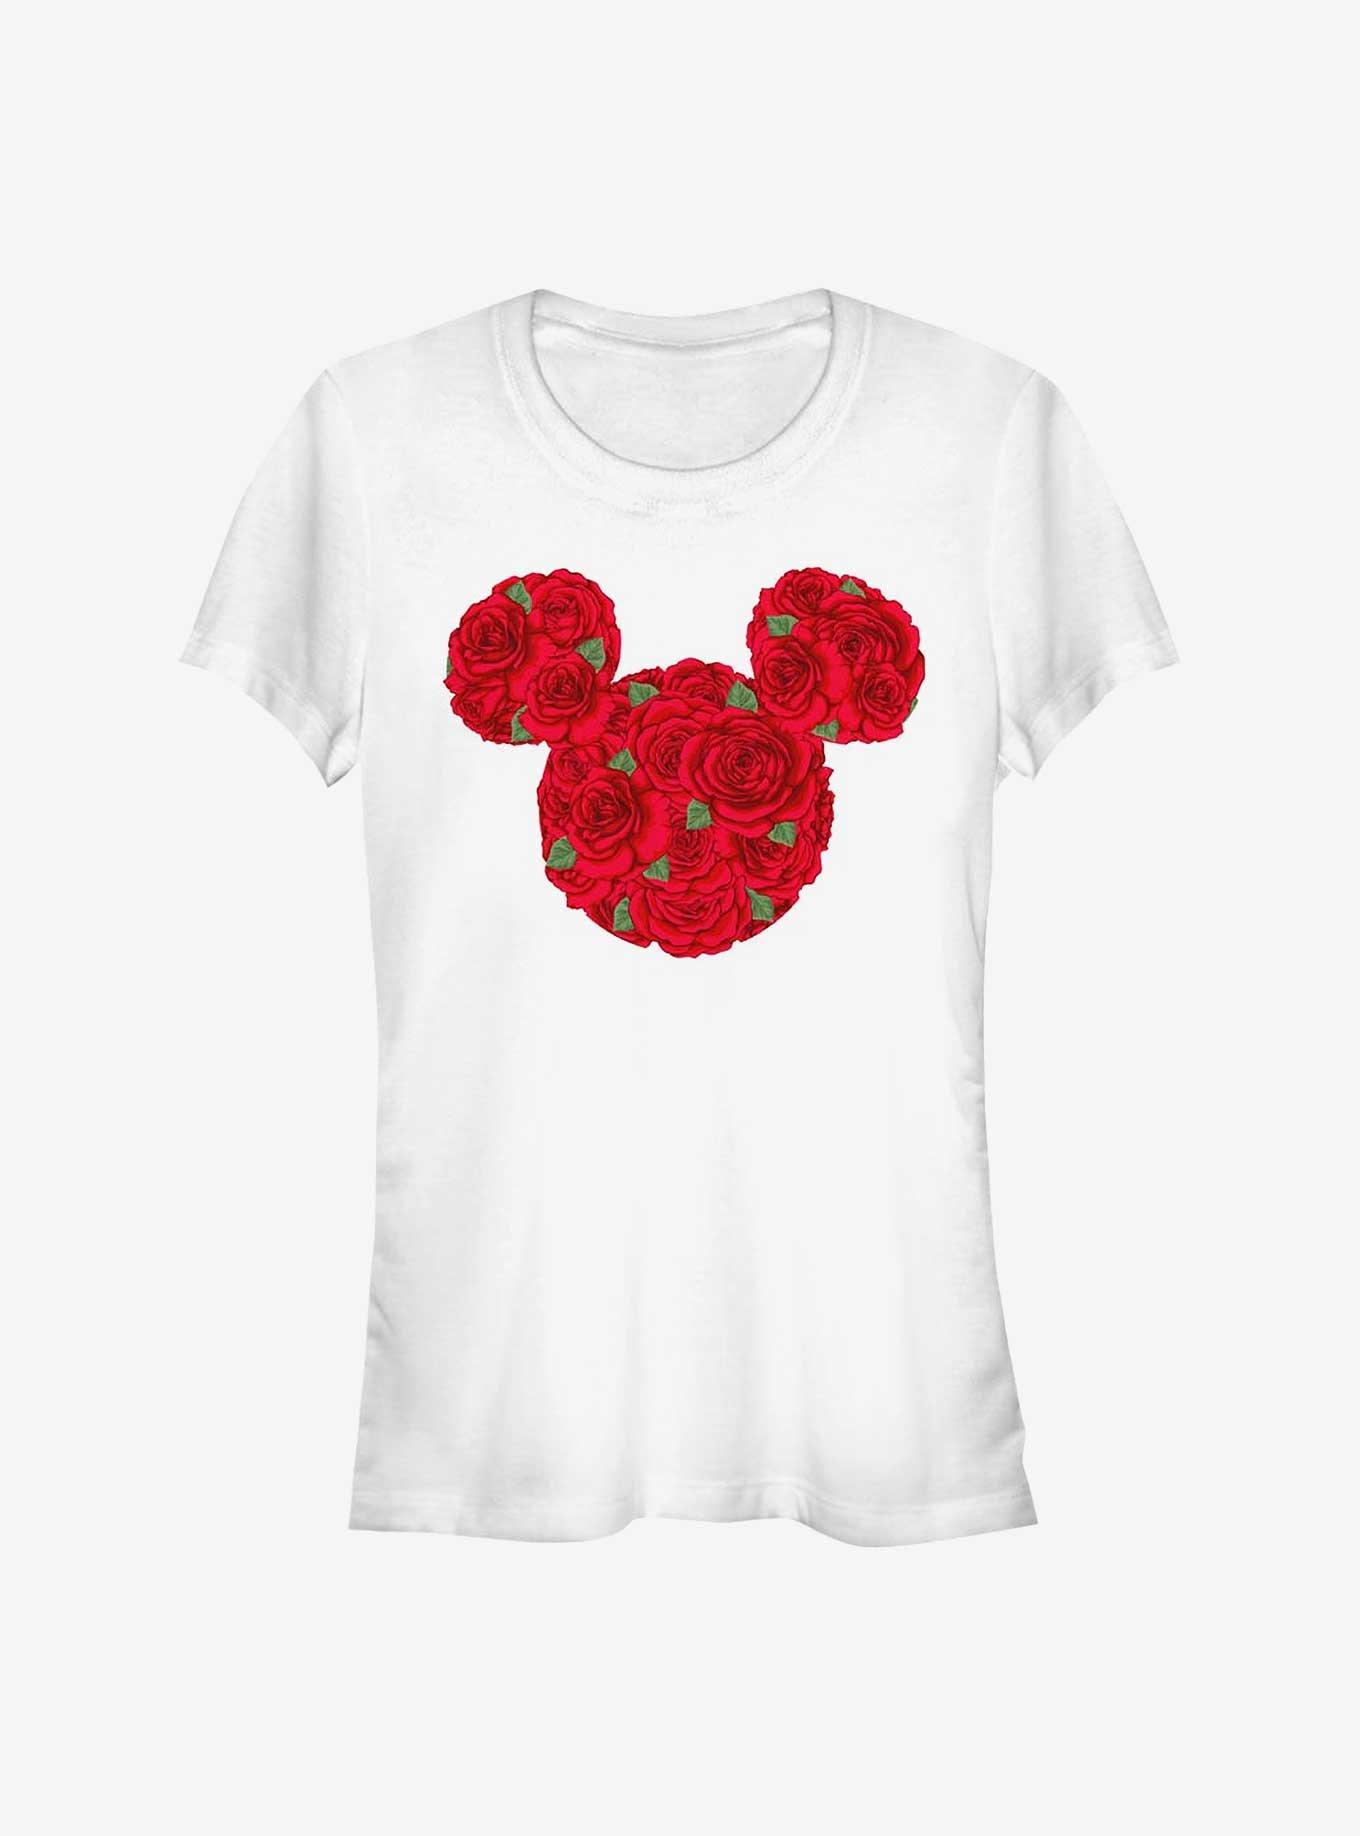 Disney Minnie Mouse Mickey Mouse Roses Girls T-Shirt, , hi-res